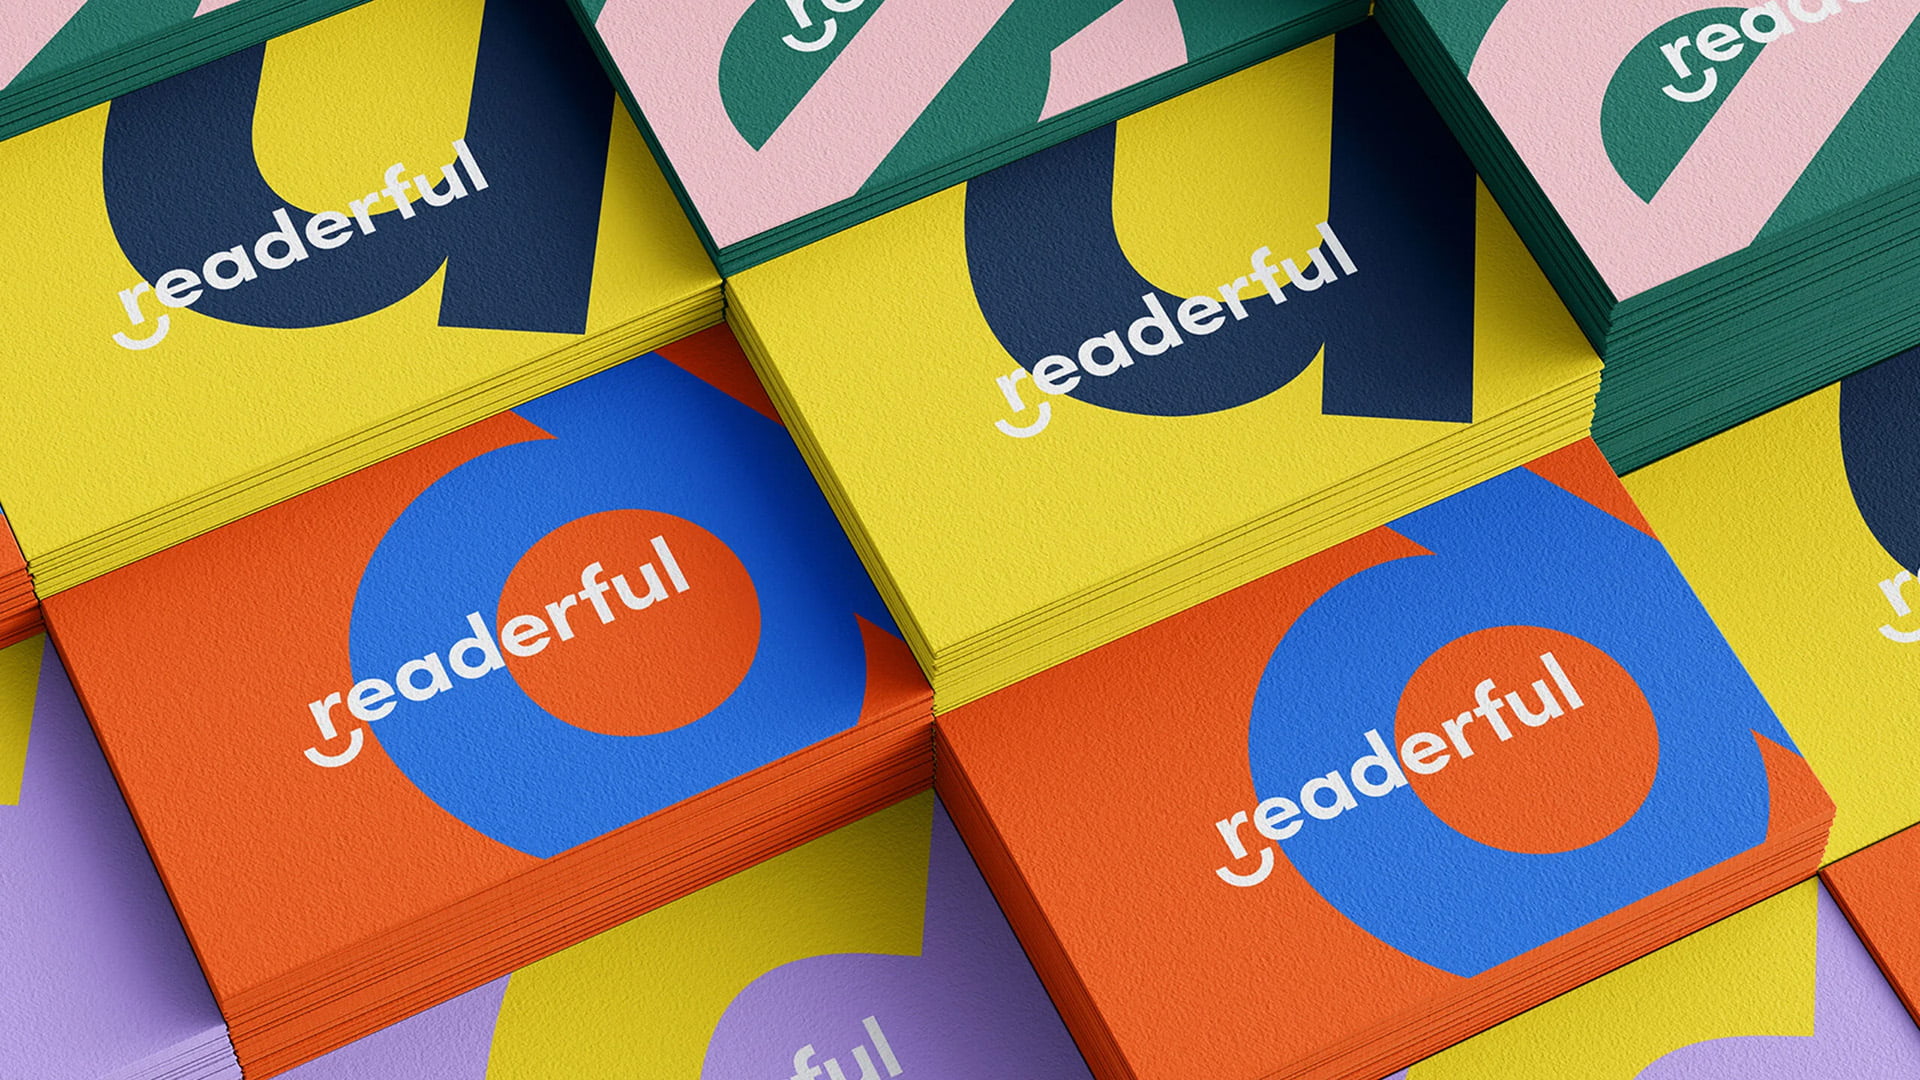 Readerful branding applied to a collection of colourful cards